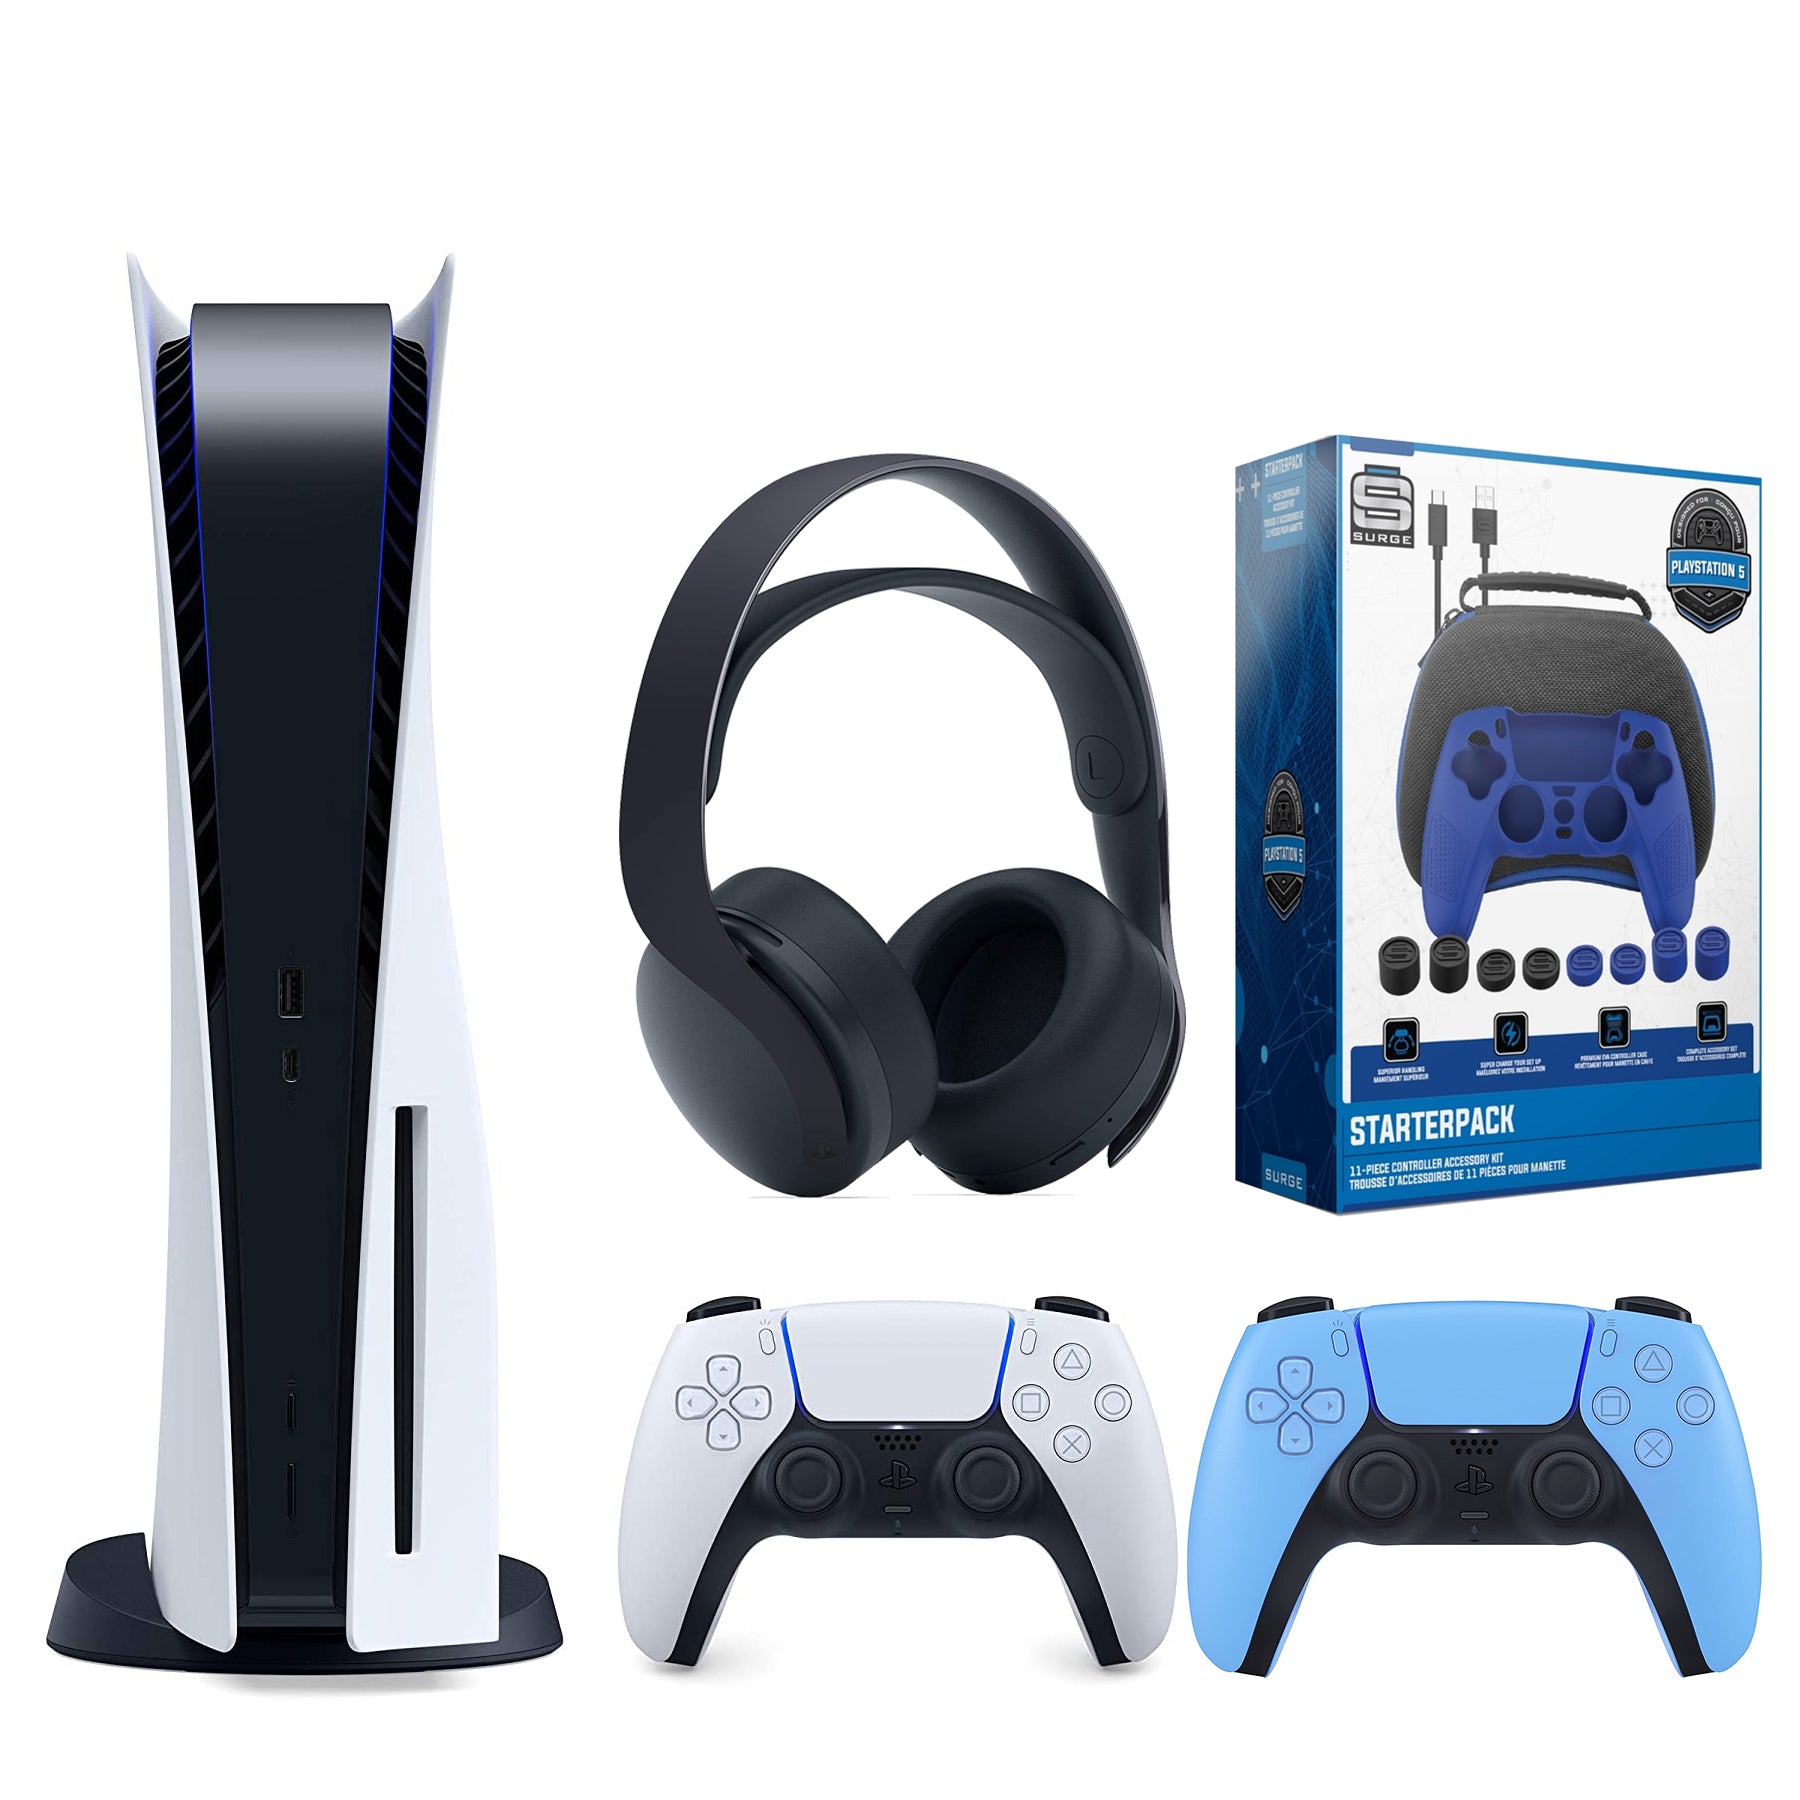 Sony Playstation 5 Disc Version (Sony PS5 Disc) with Extra Starlight Blue Controller, Black PULSE 3D Headset and Gamer Starter Pack Bundle - Pro-Distributing